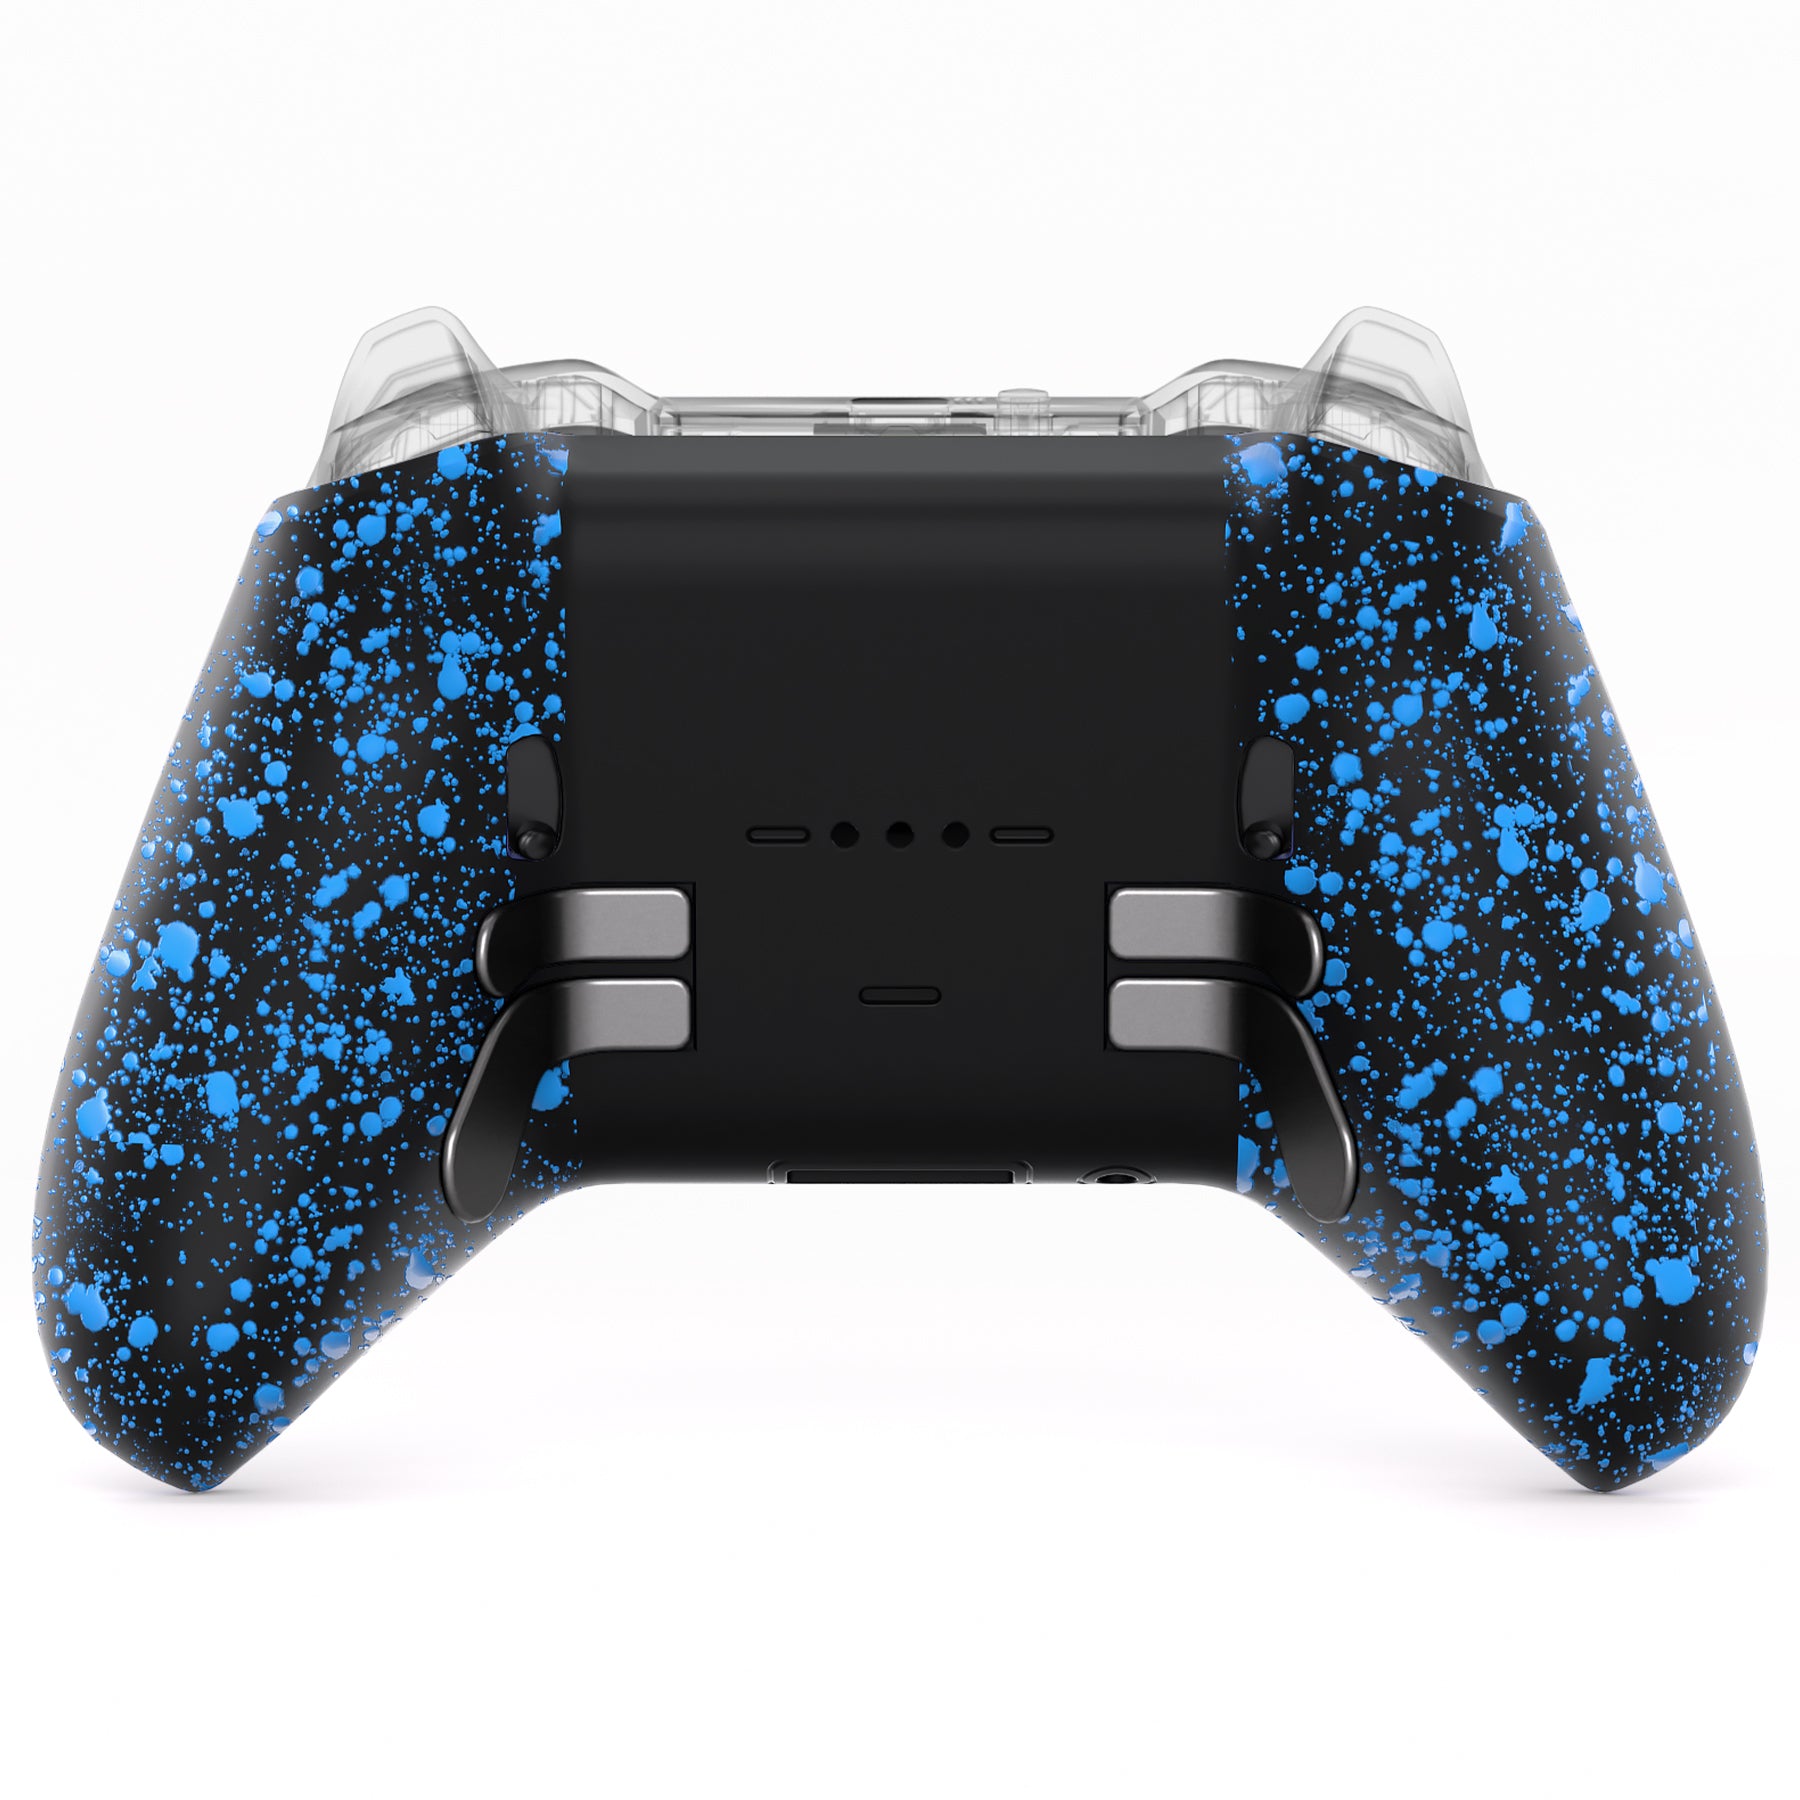 Elite Textured Model Housing Controller Bottom 2 – for Shell Retail Xbox for Controller, Series Series Elite Xbox Custom Case Cover eXtremeRate Core Controller WITHOUT eXtremeRate - Shell Replacement 1797 2 Blue Wireless